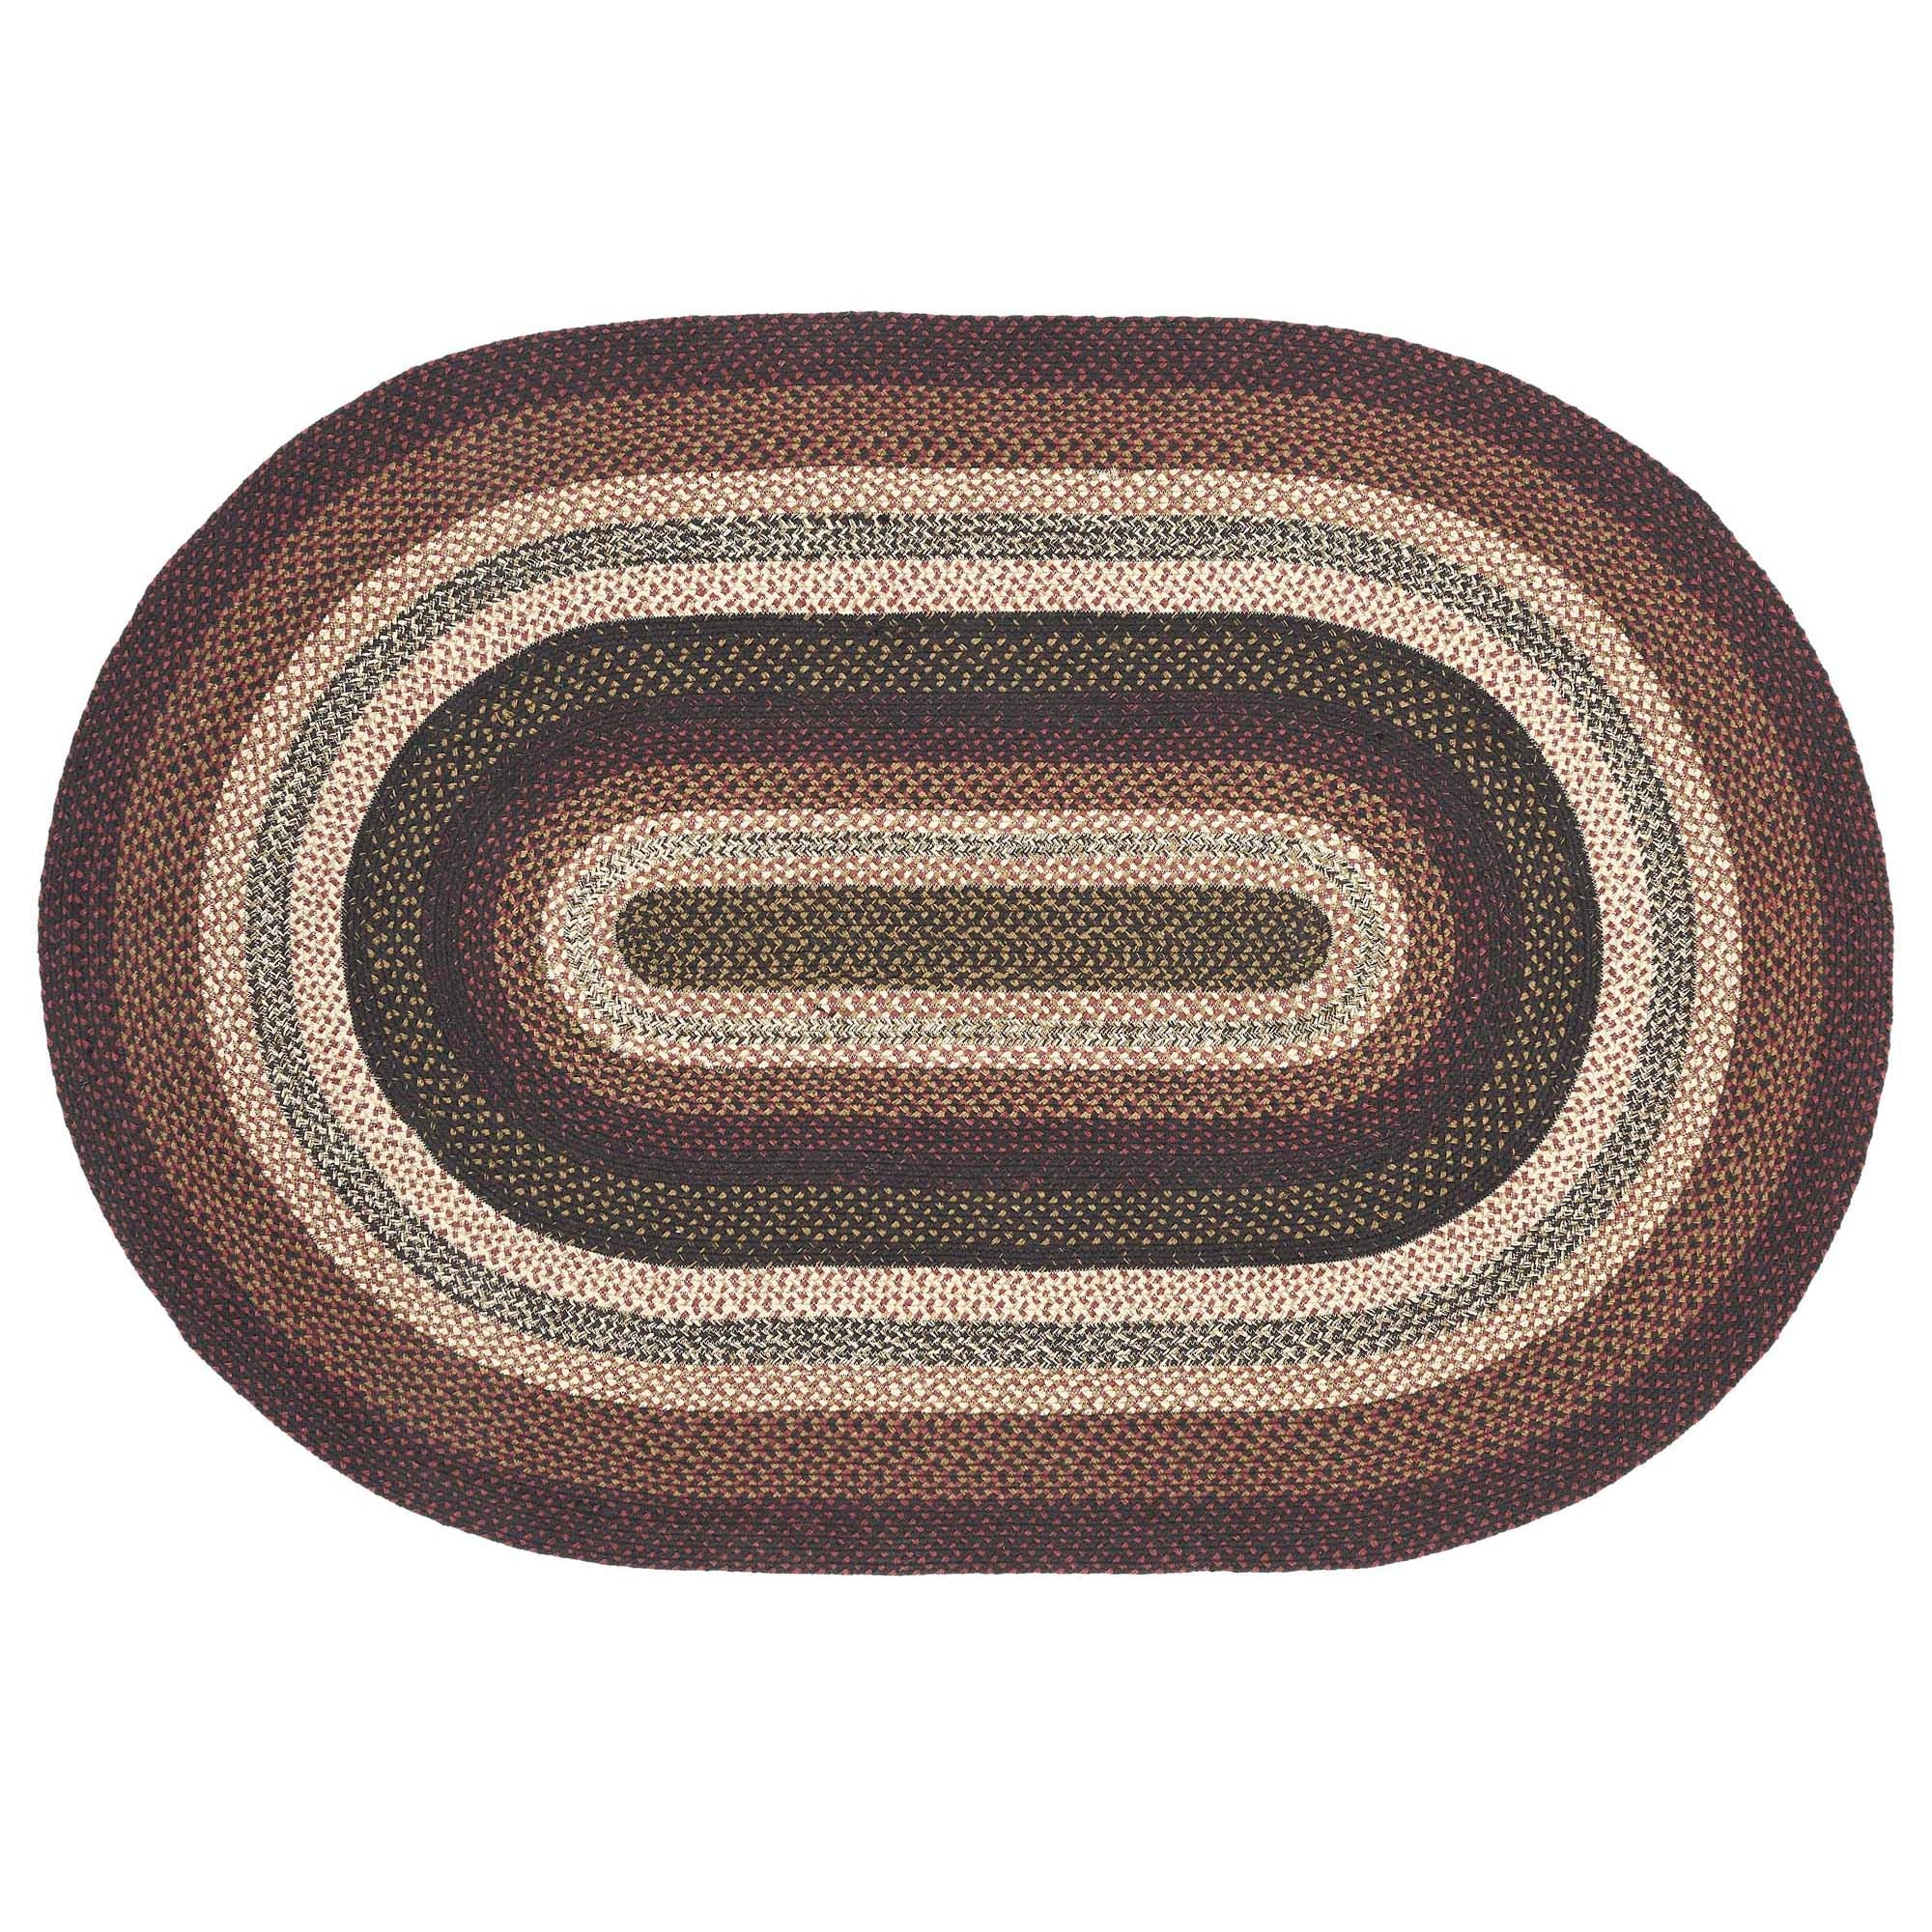 Beckham Jute Braided Rug Oval with Rug Pad 4'x6' VHC Brands